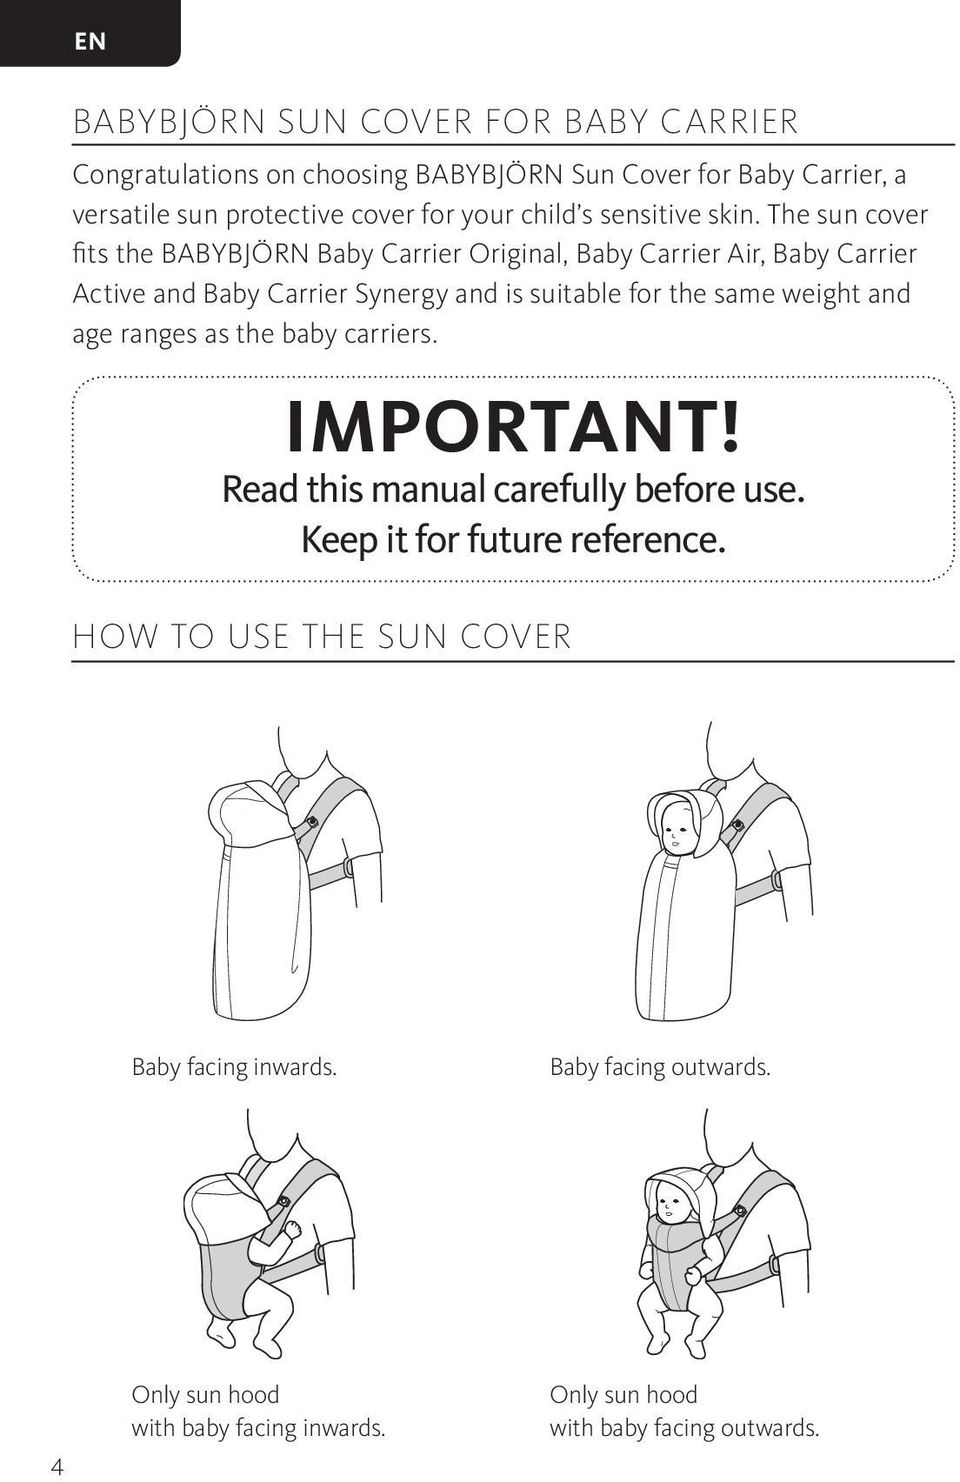 The sun cover fits the BABYBJÖRN Baby Carrier Original, Baby Carrier Air, Baby Carrier Active and Baby Carrier Synergy and is suitable for the same